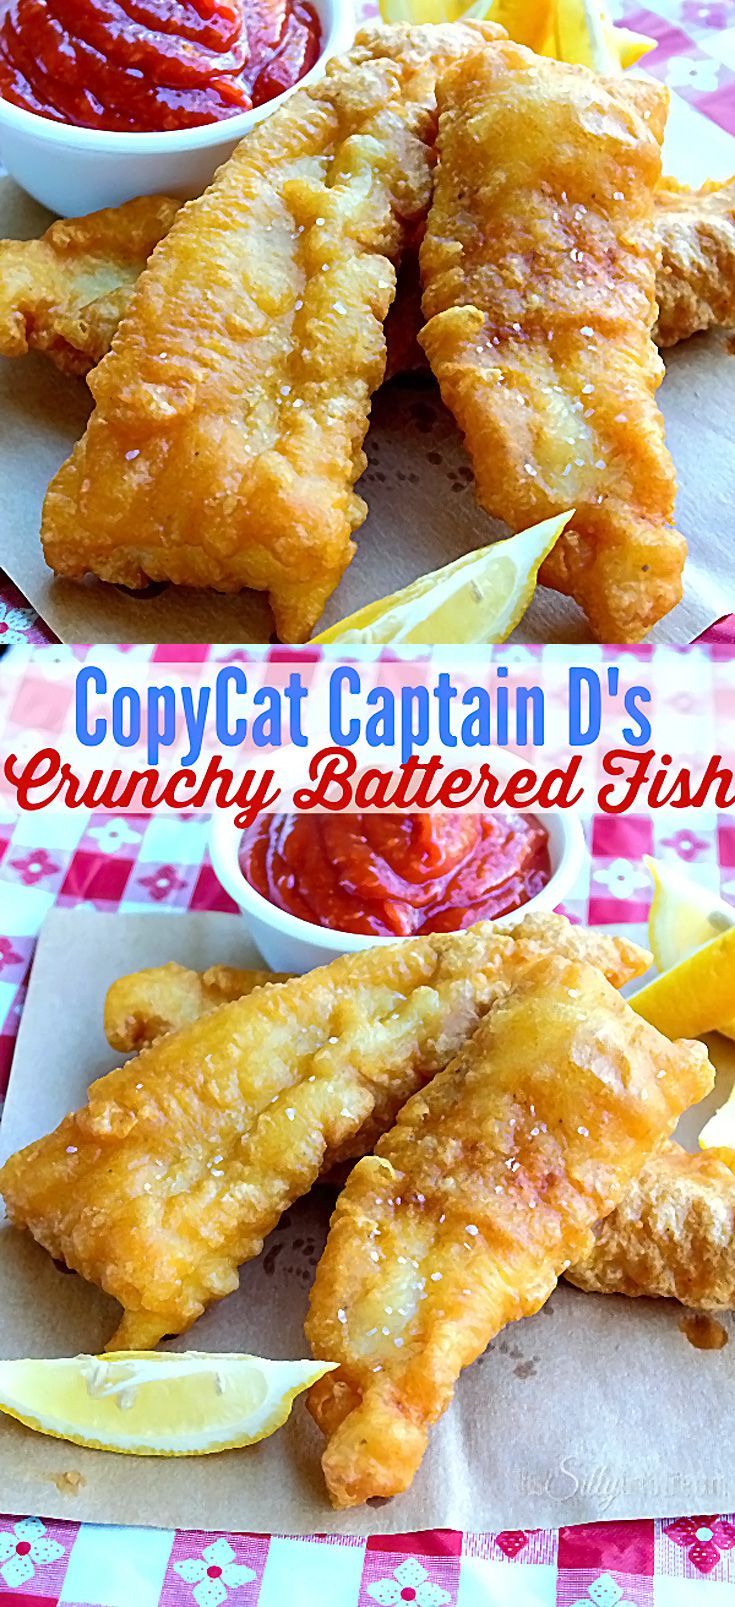 Crispy battered flaky white fish that is moist inside, I don’t know if it can get much better than this!